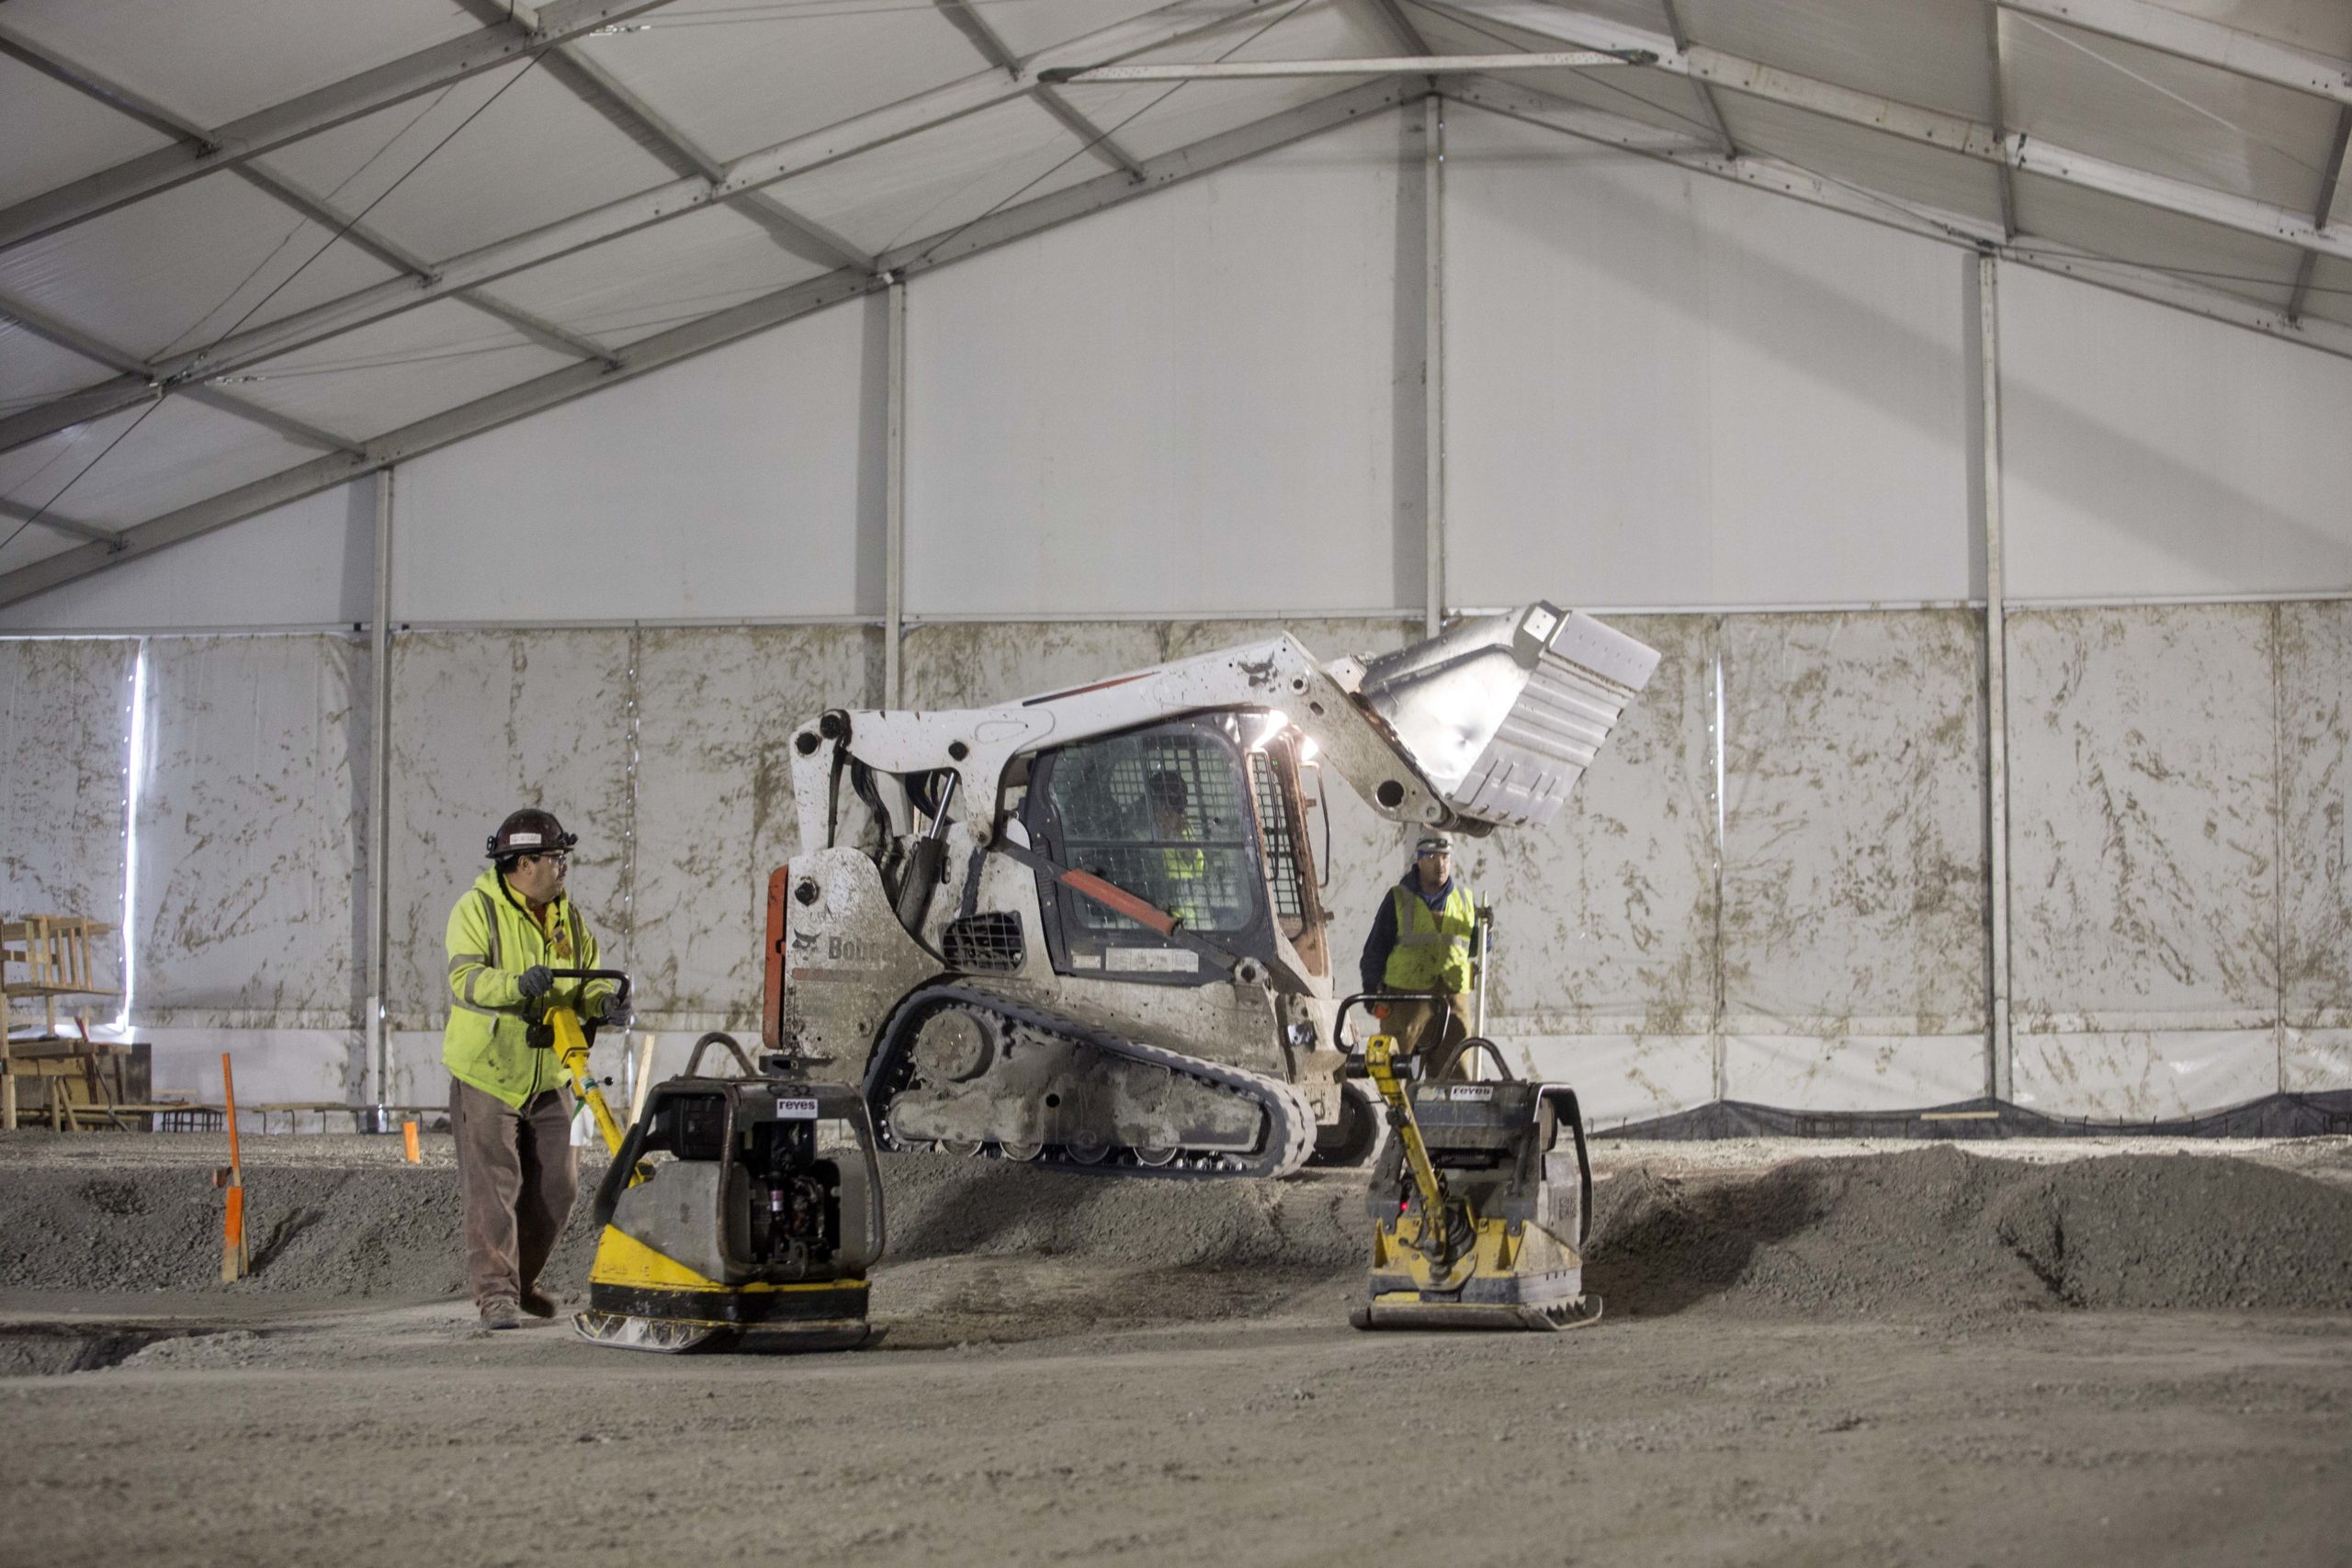 Construction Tent Improves Safety and COVID Response - American Pavilion